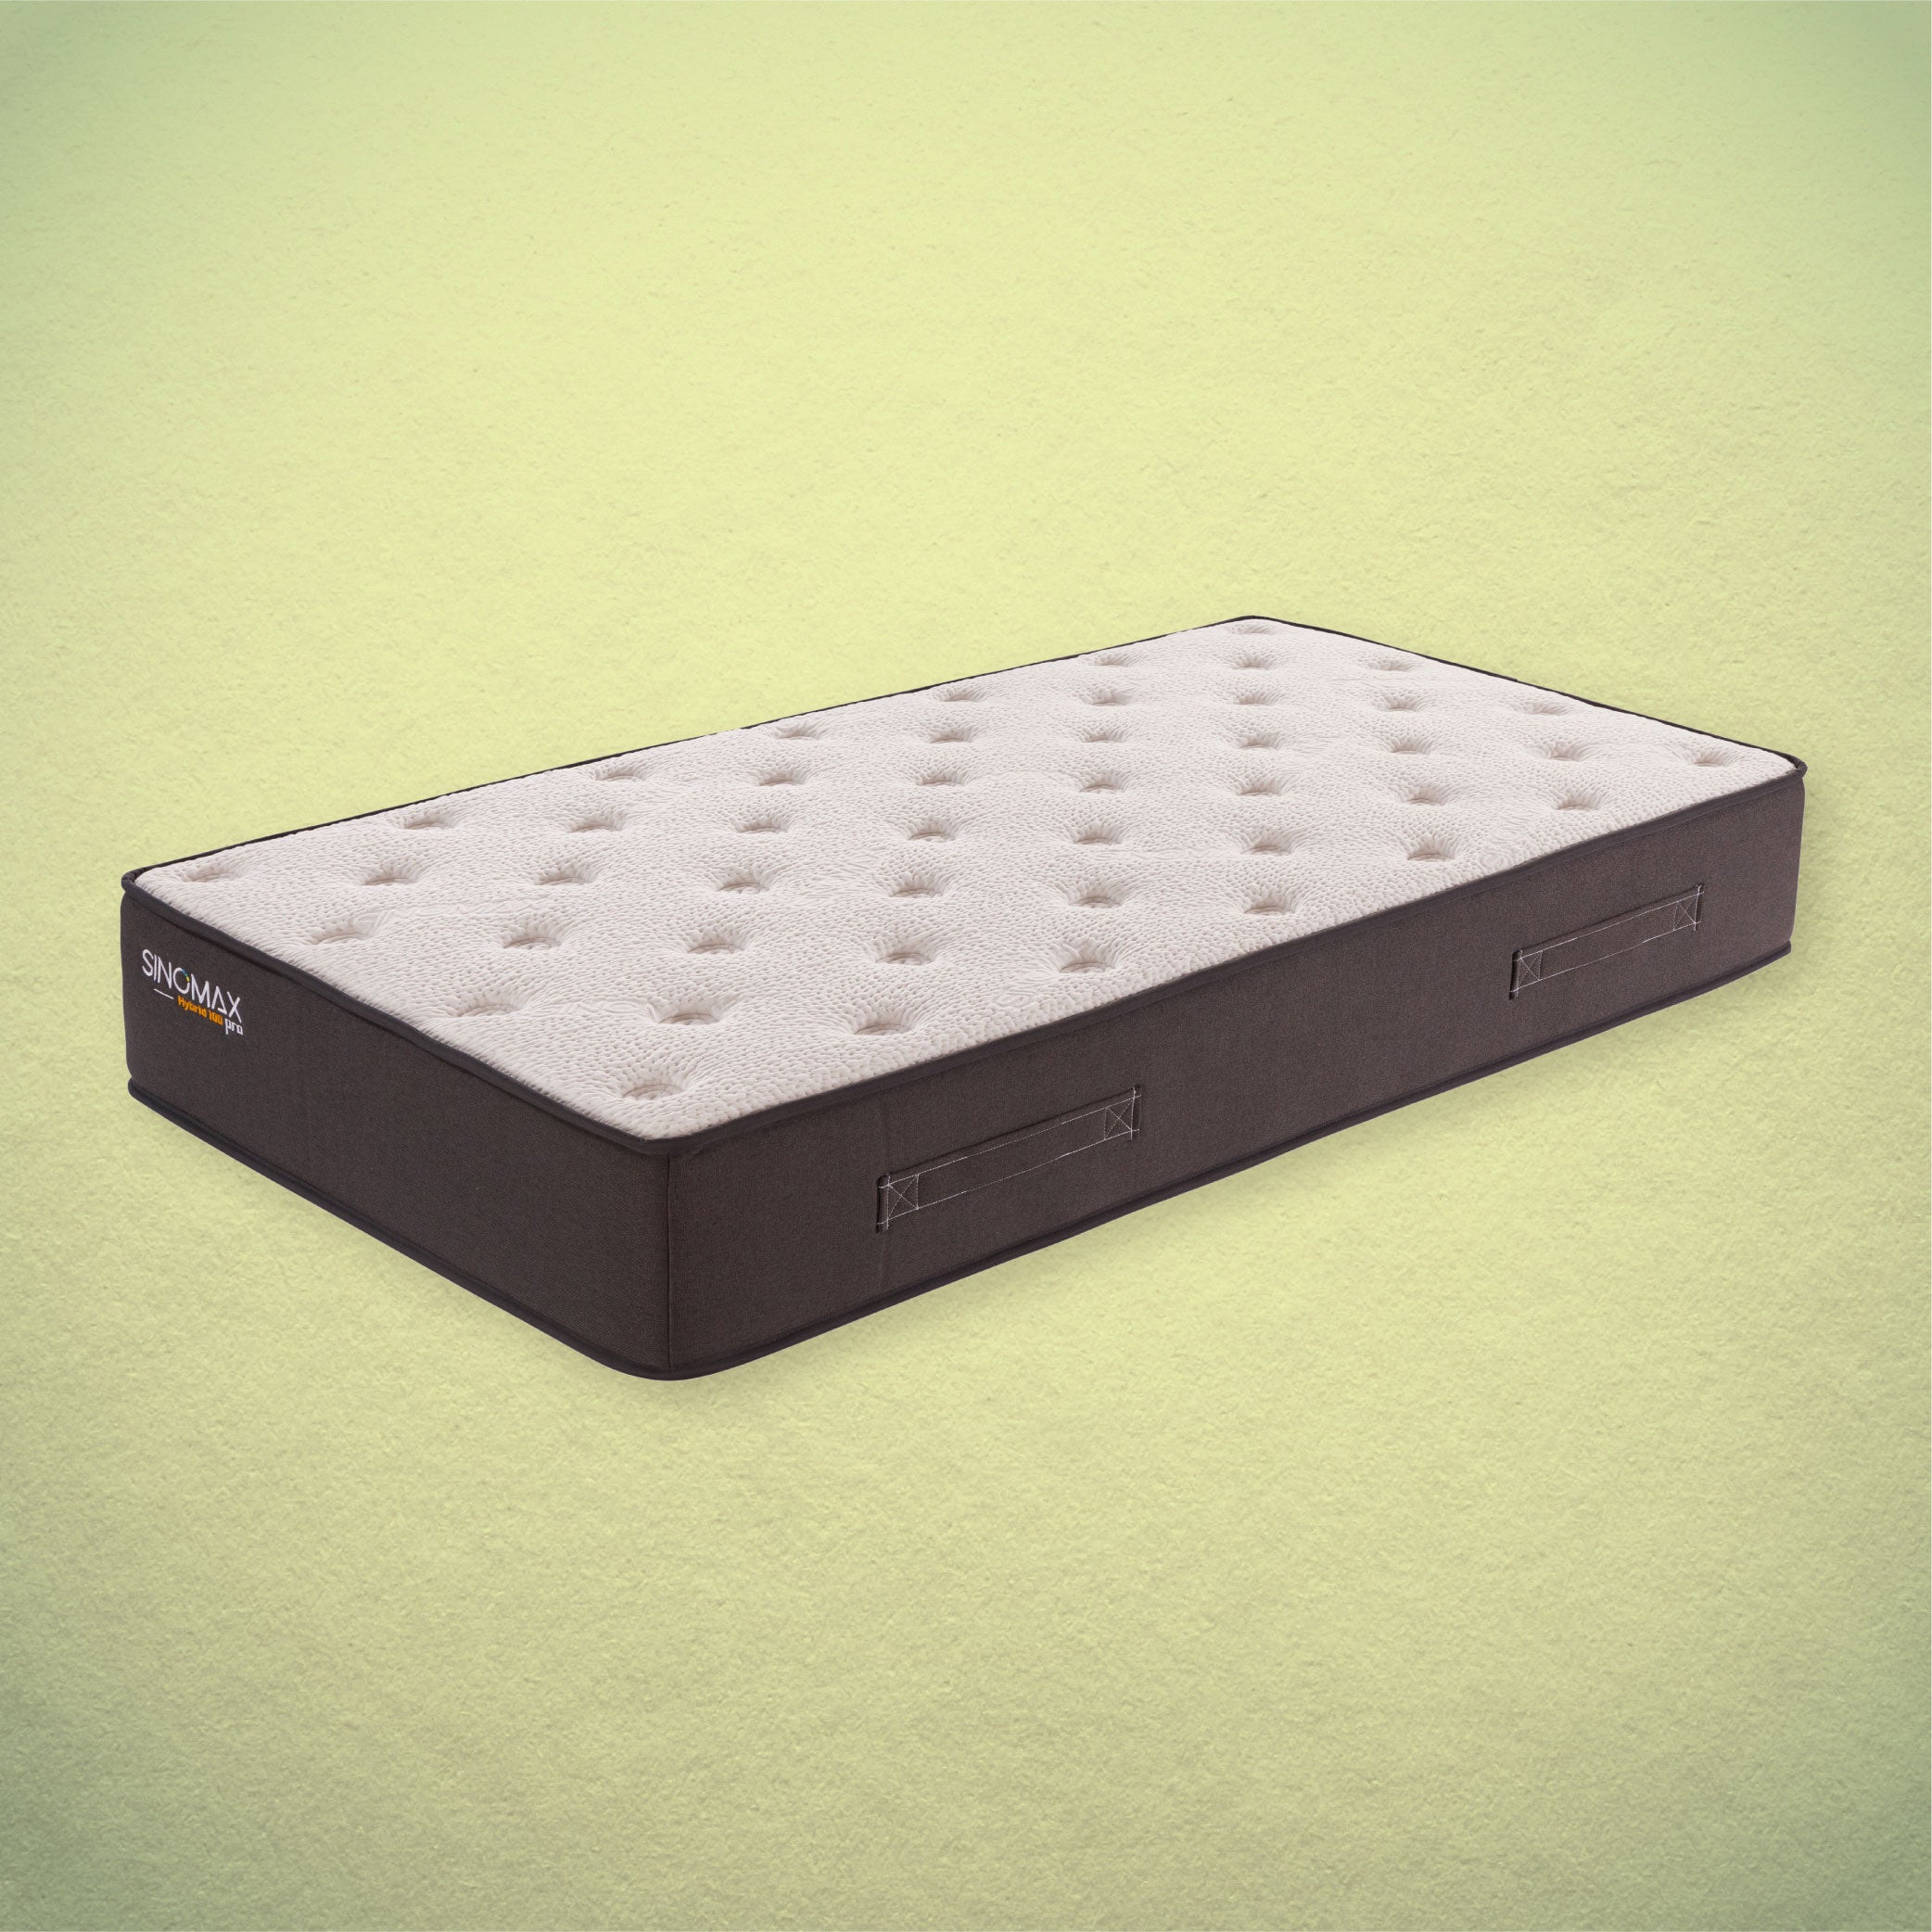 Hybrid 100 Pro Mattress - Tailor-made Size (above 48"W)